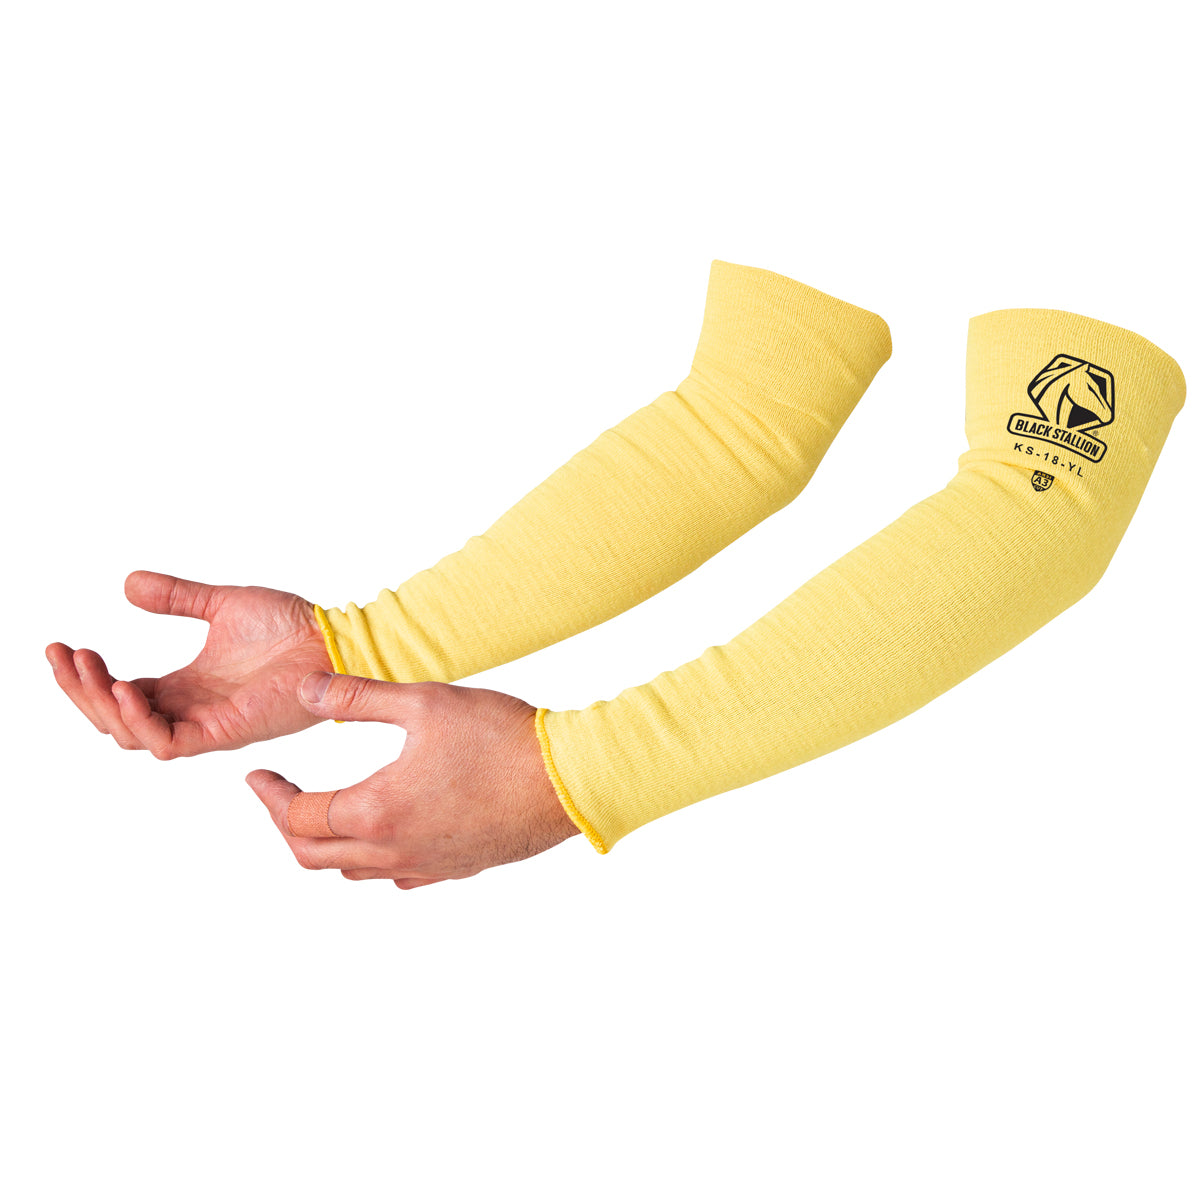 Radians RAD5118KTS Cut DuPont Kevlar® Material, 1-Ply, ANSI Cut Level A2,  Full Arm Cut Protection 1-Ply Kevlar A2 Sleeve, 18 with Thumb Slot, Size